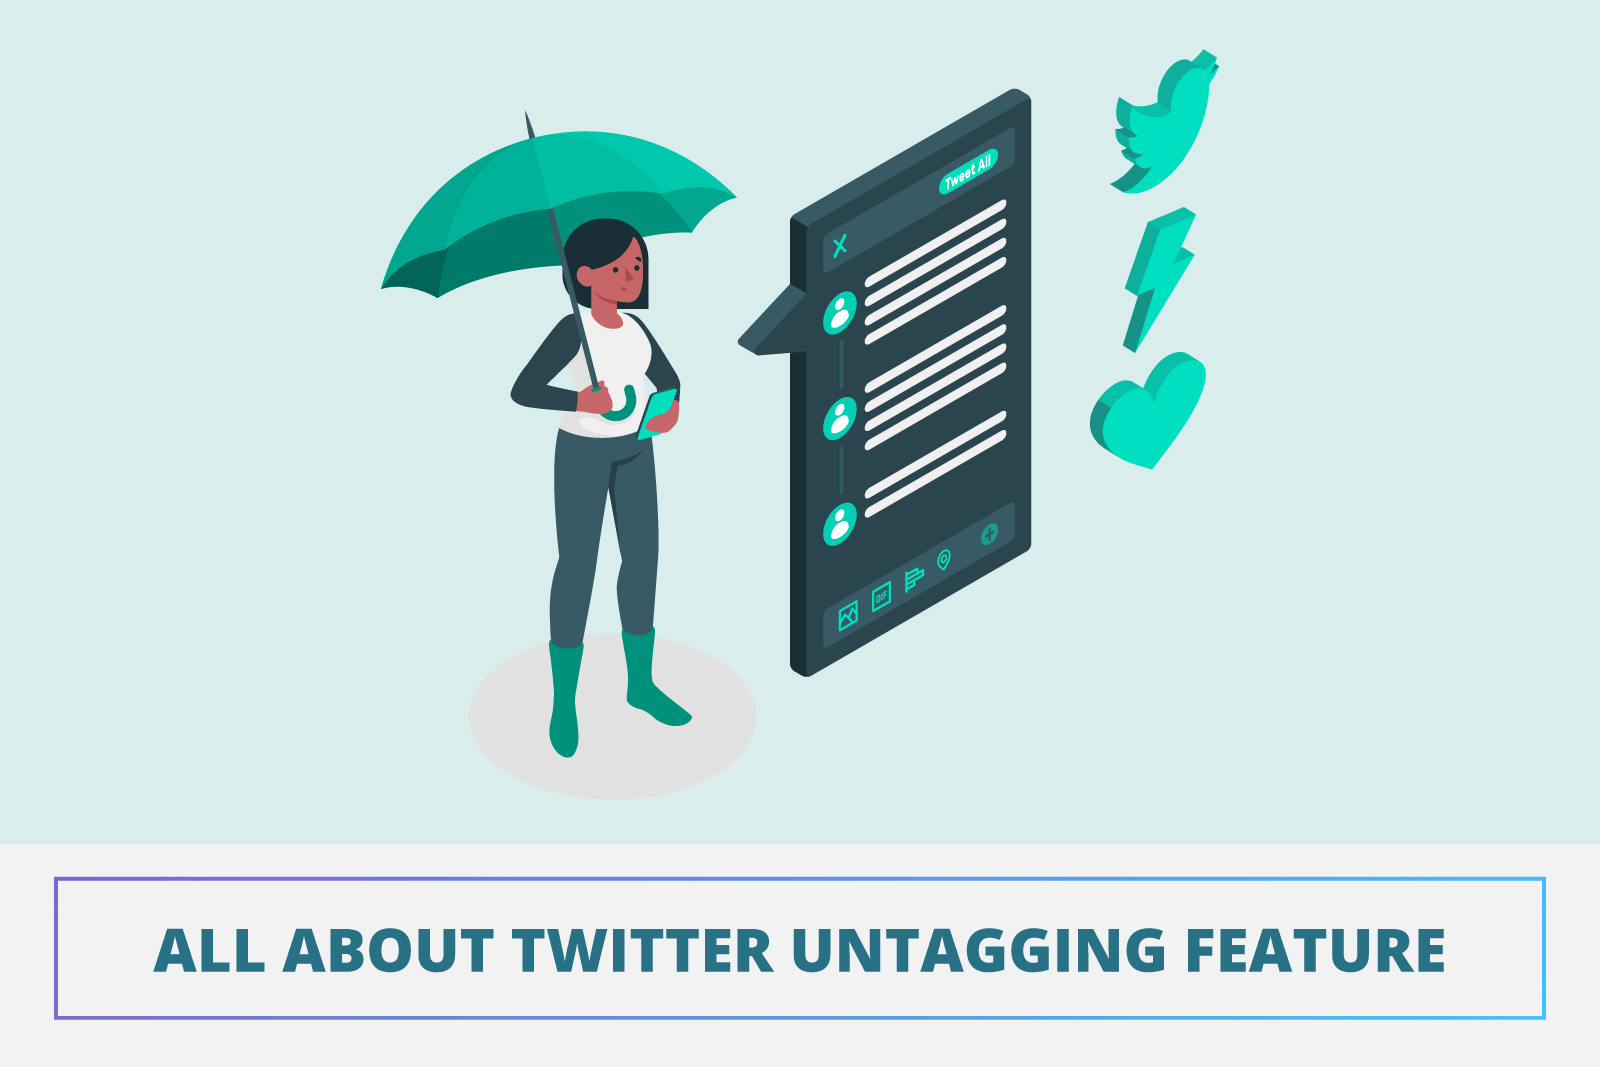 All about Twitter untagging feature